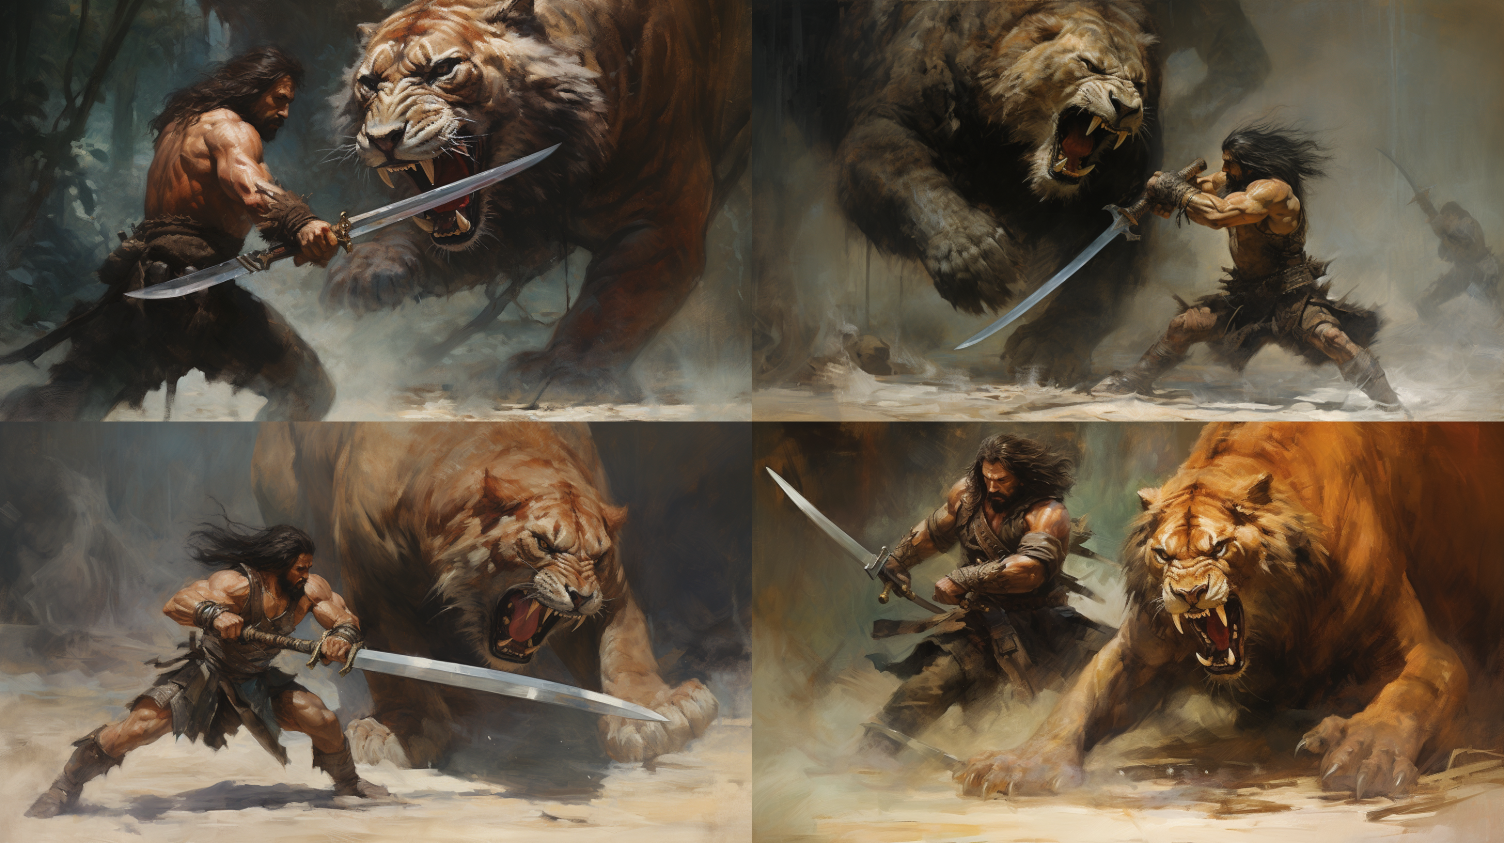 nakomoto_conan_the_barbarian_fight_with_Saber-toothed_tiger_in_c8f81c26-3629-440f-861c-fb6531189830.png